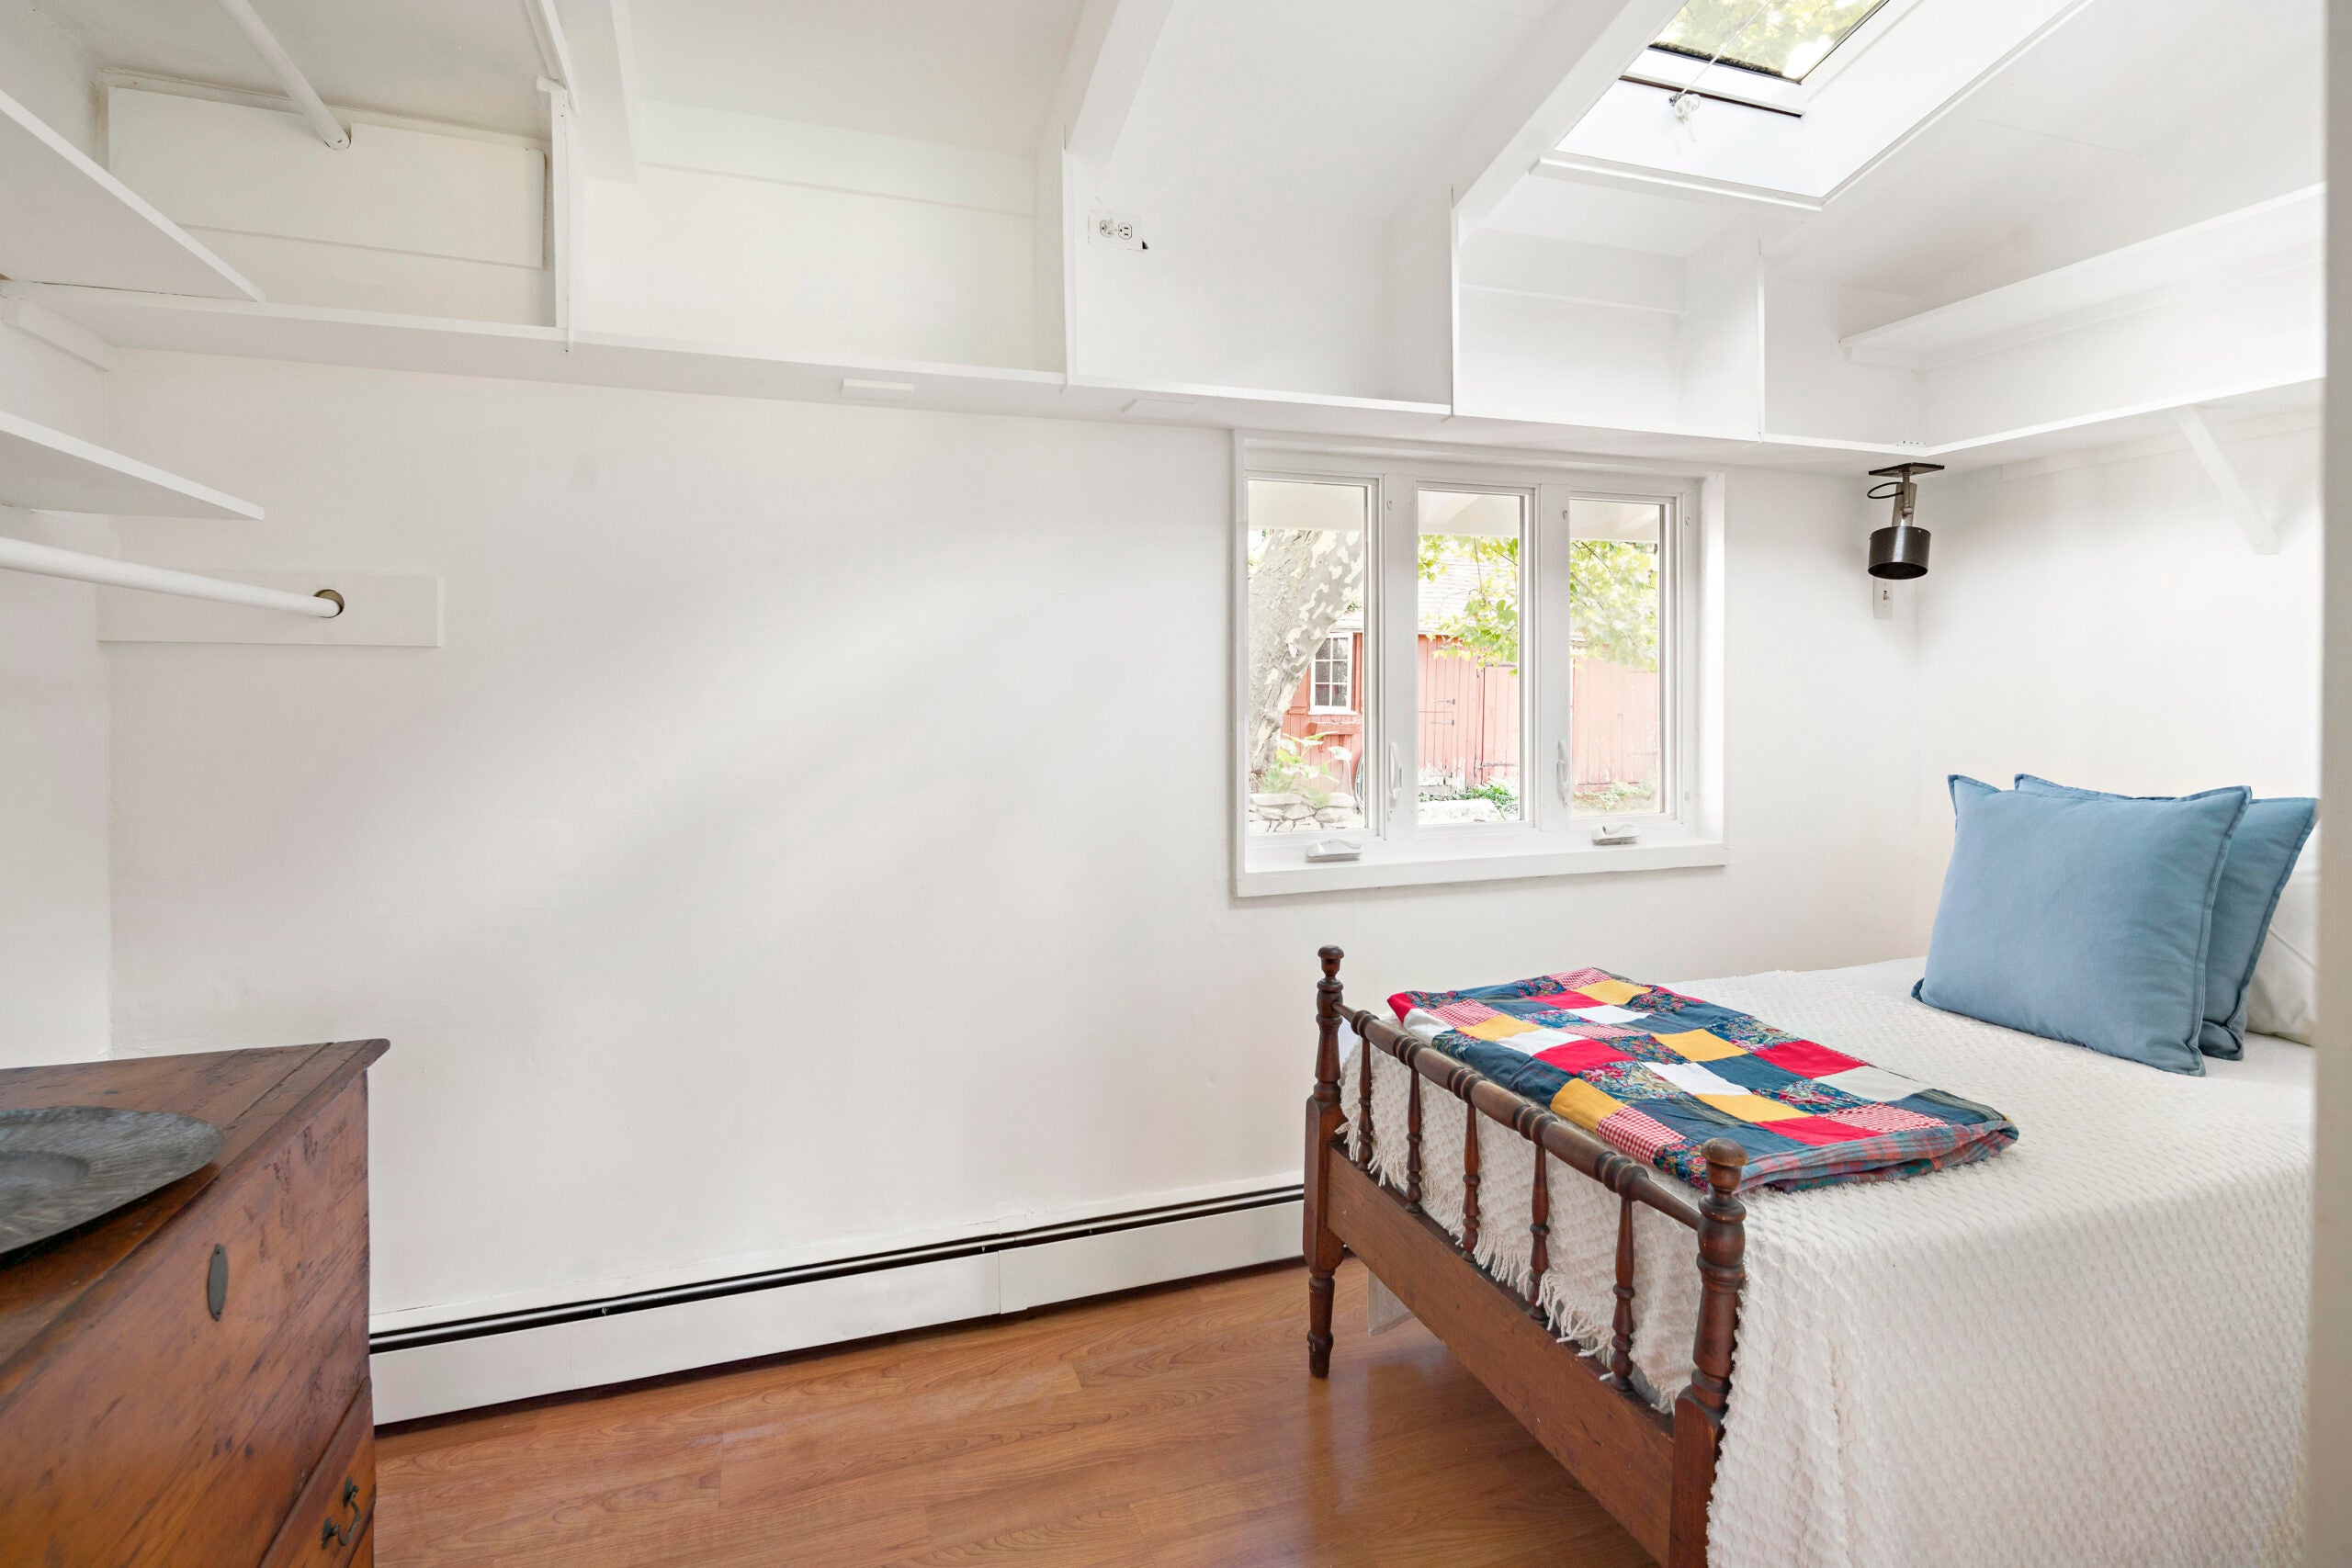 A small bedroom with white walls, a skylight, and cubbies at ceiling level.